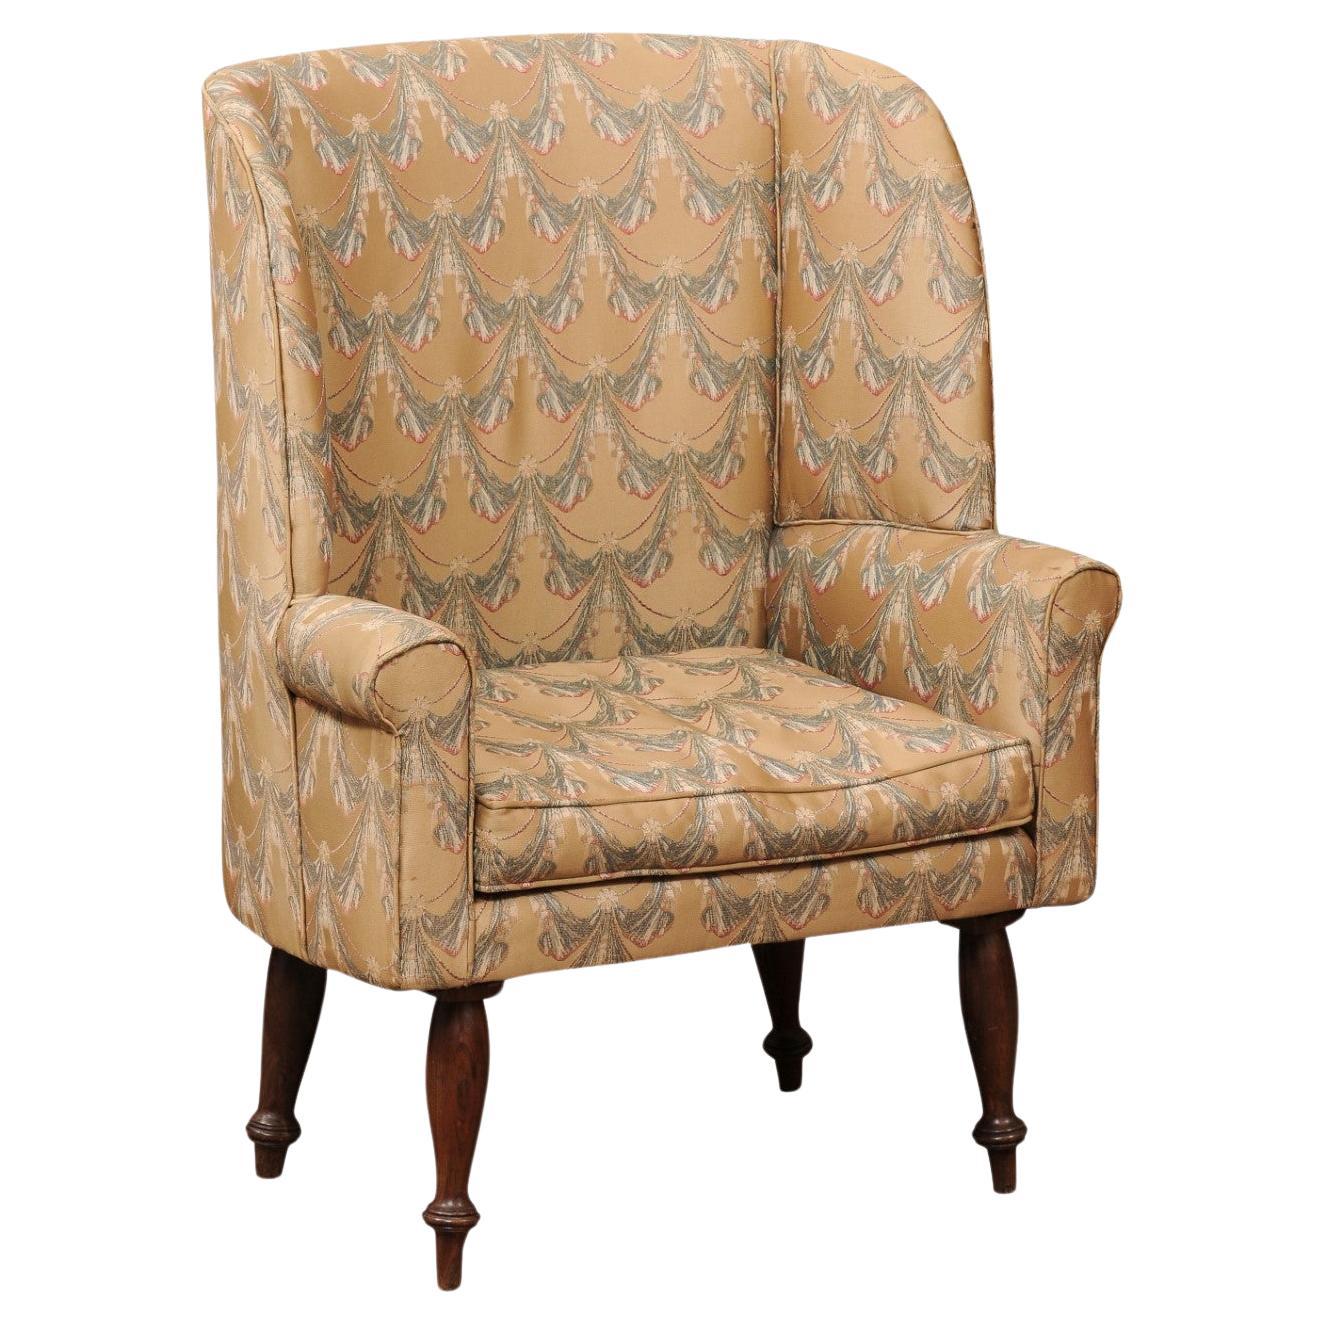 English 19th Century Rosewood Upholstered Barrel Wing Back Chair